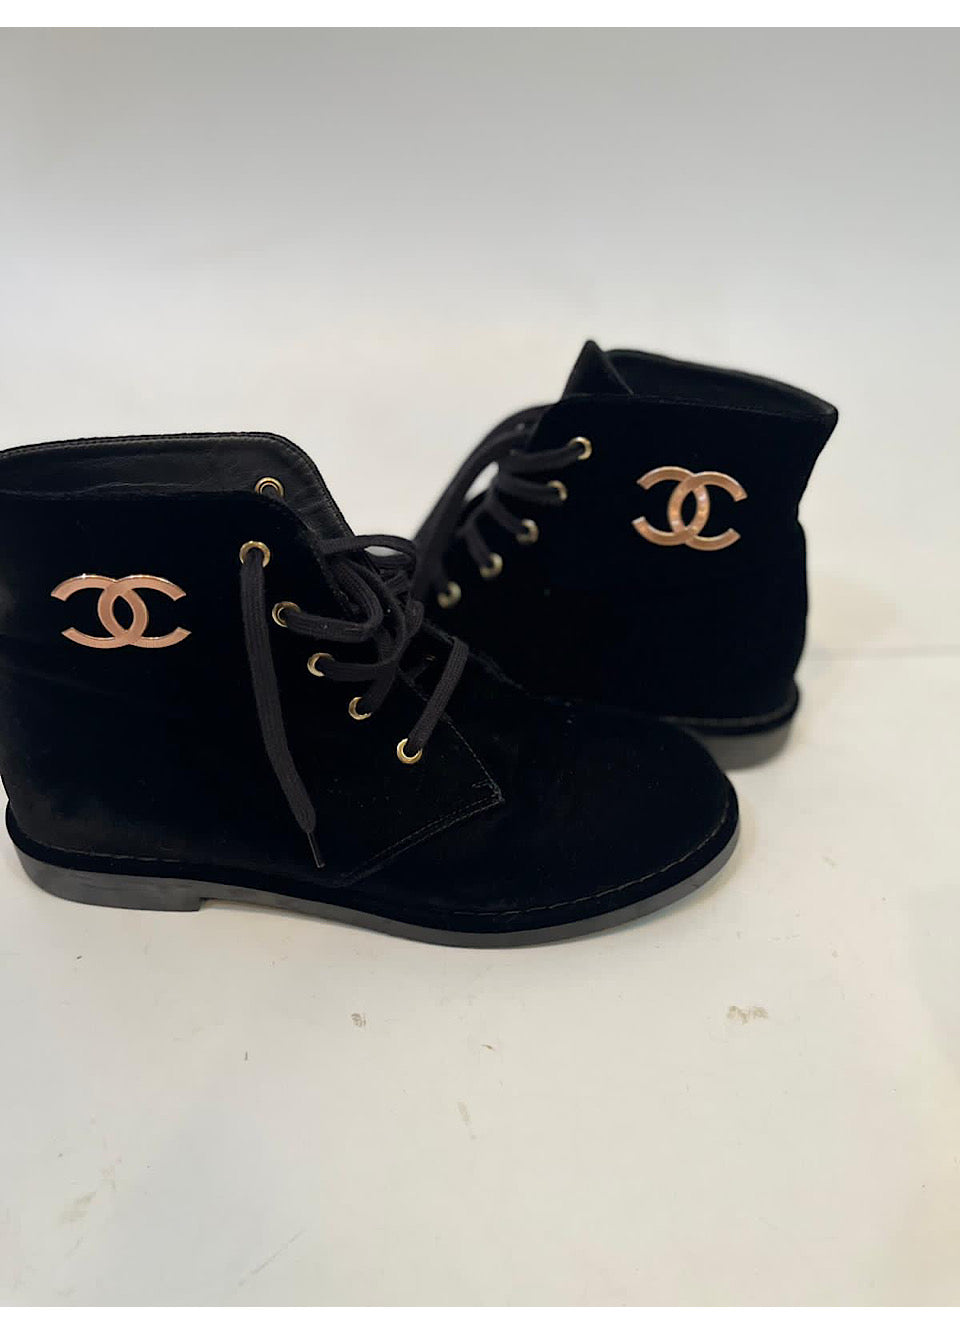 Chanel Black Suede Lace Up Ankle Boots EU 39 US 8.5 – HelensChanel